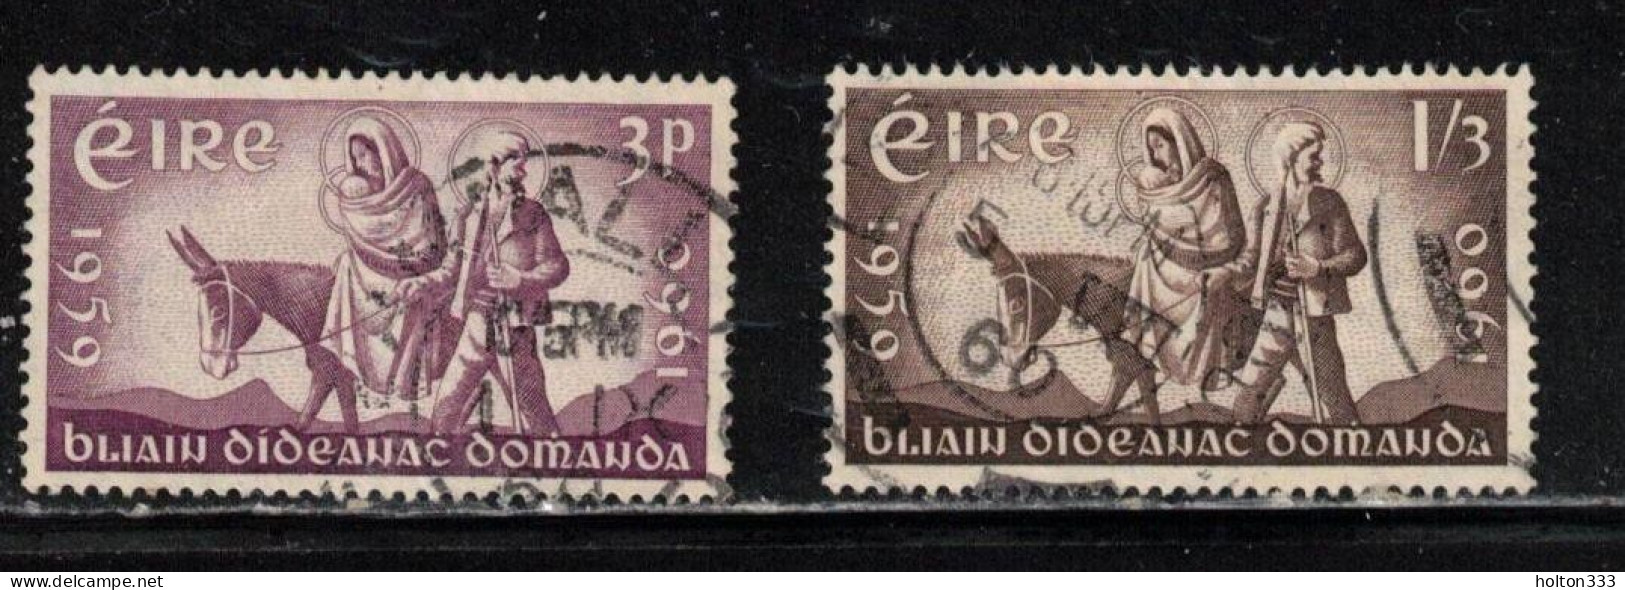 IRELAND Scott # 173-4 Used - Flight Of The Holy Family C - Used Stamps